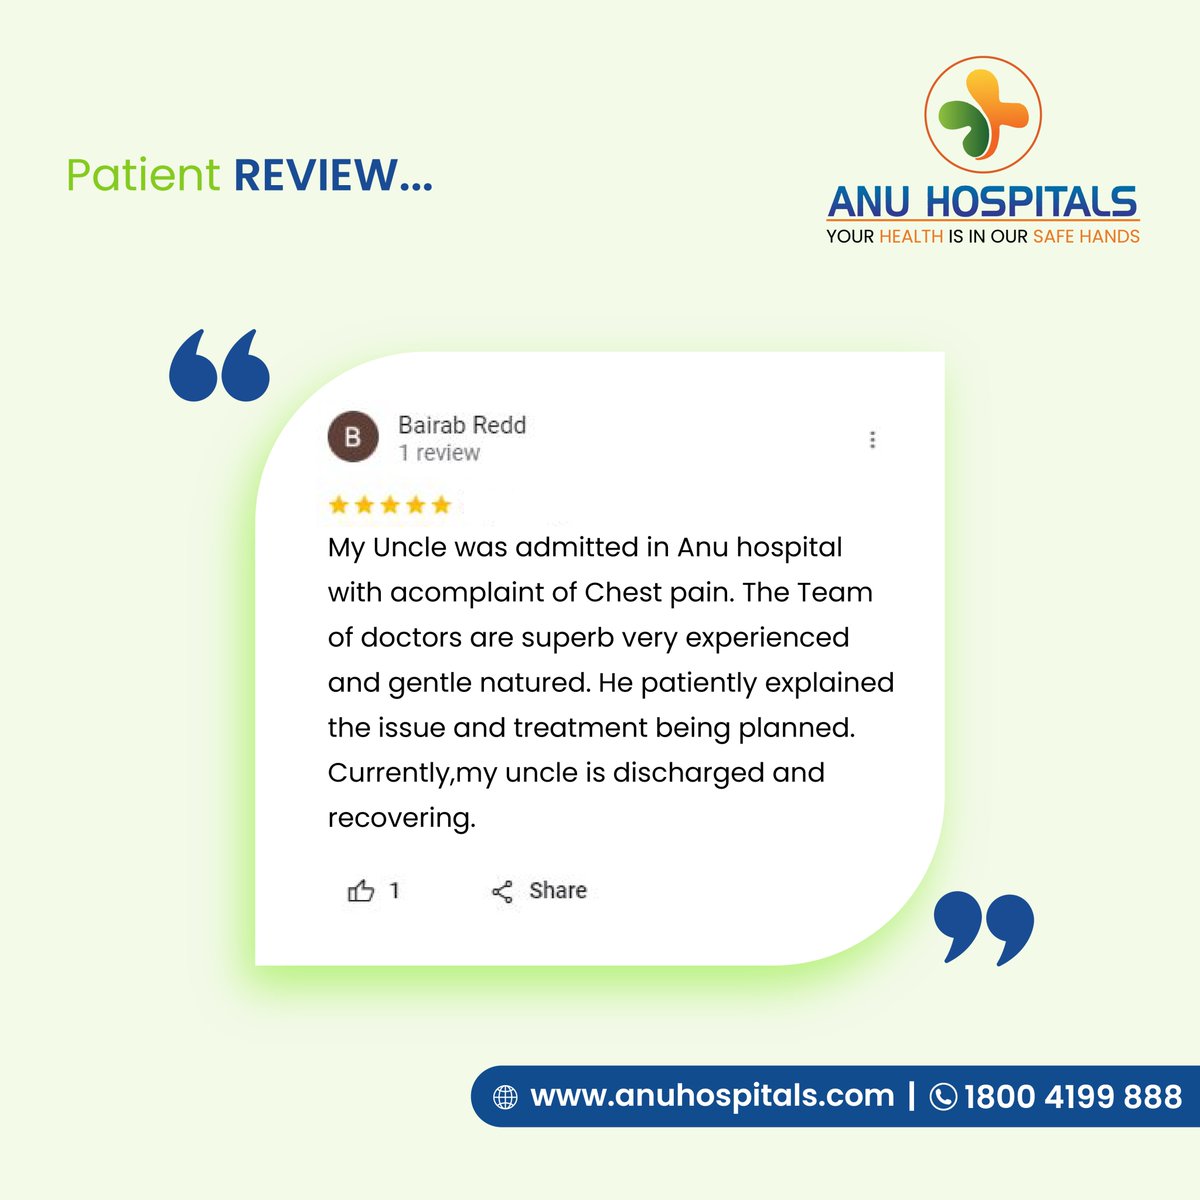 We express our profound appreciation to our exceptional patients, whose gestures of kindness and generosity in sharing their positive experiences deeply resonate with us. 
#anuhospitals #vijayawada #patientreview #GratefulPatient #PatientExperience #TopQualityCare #PositiveHealth